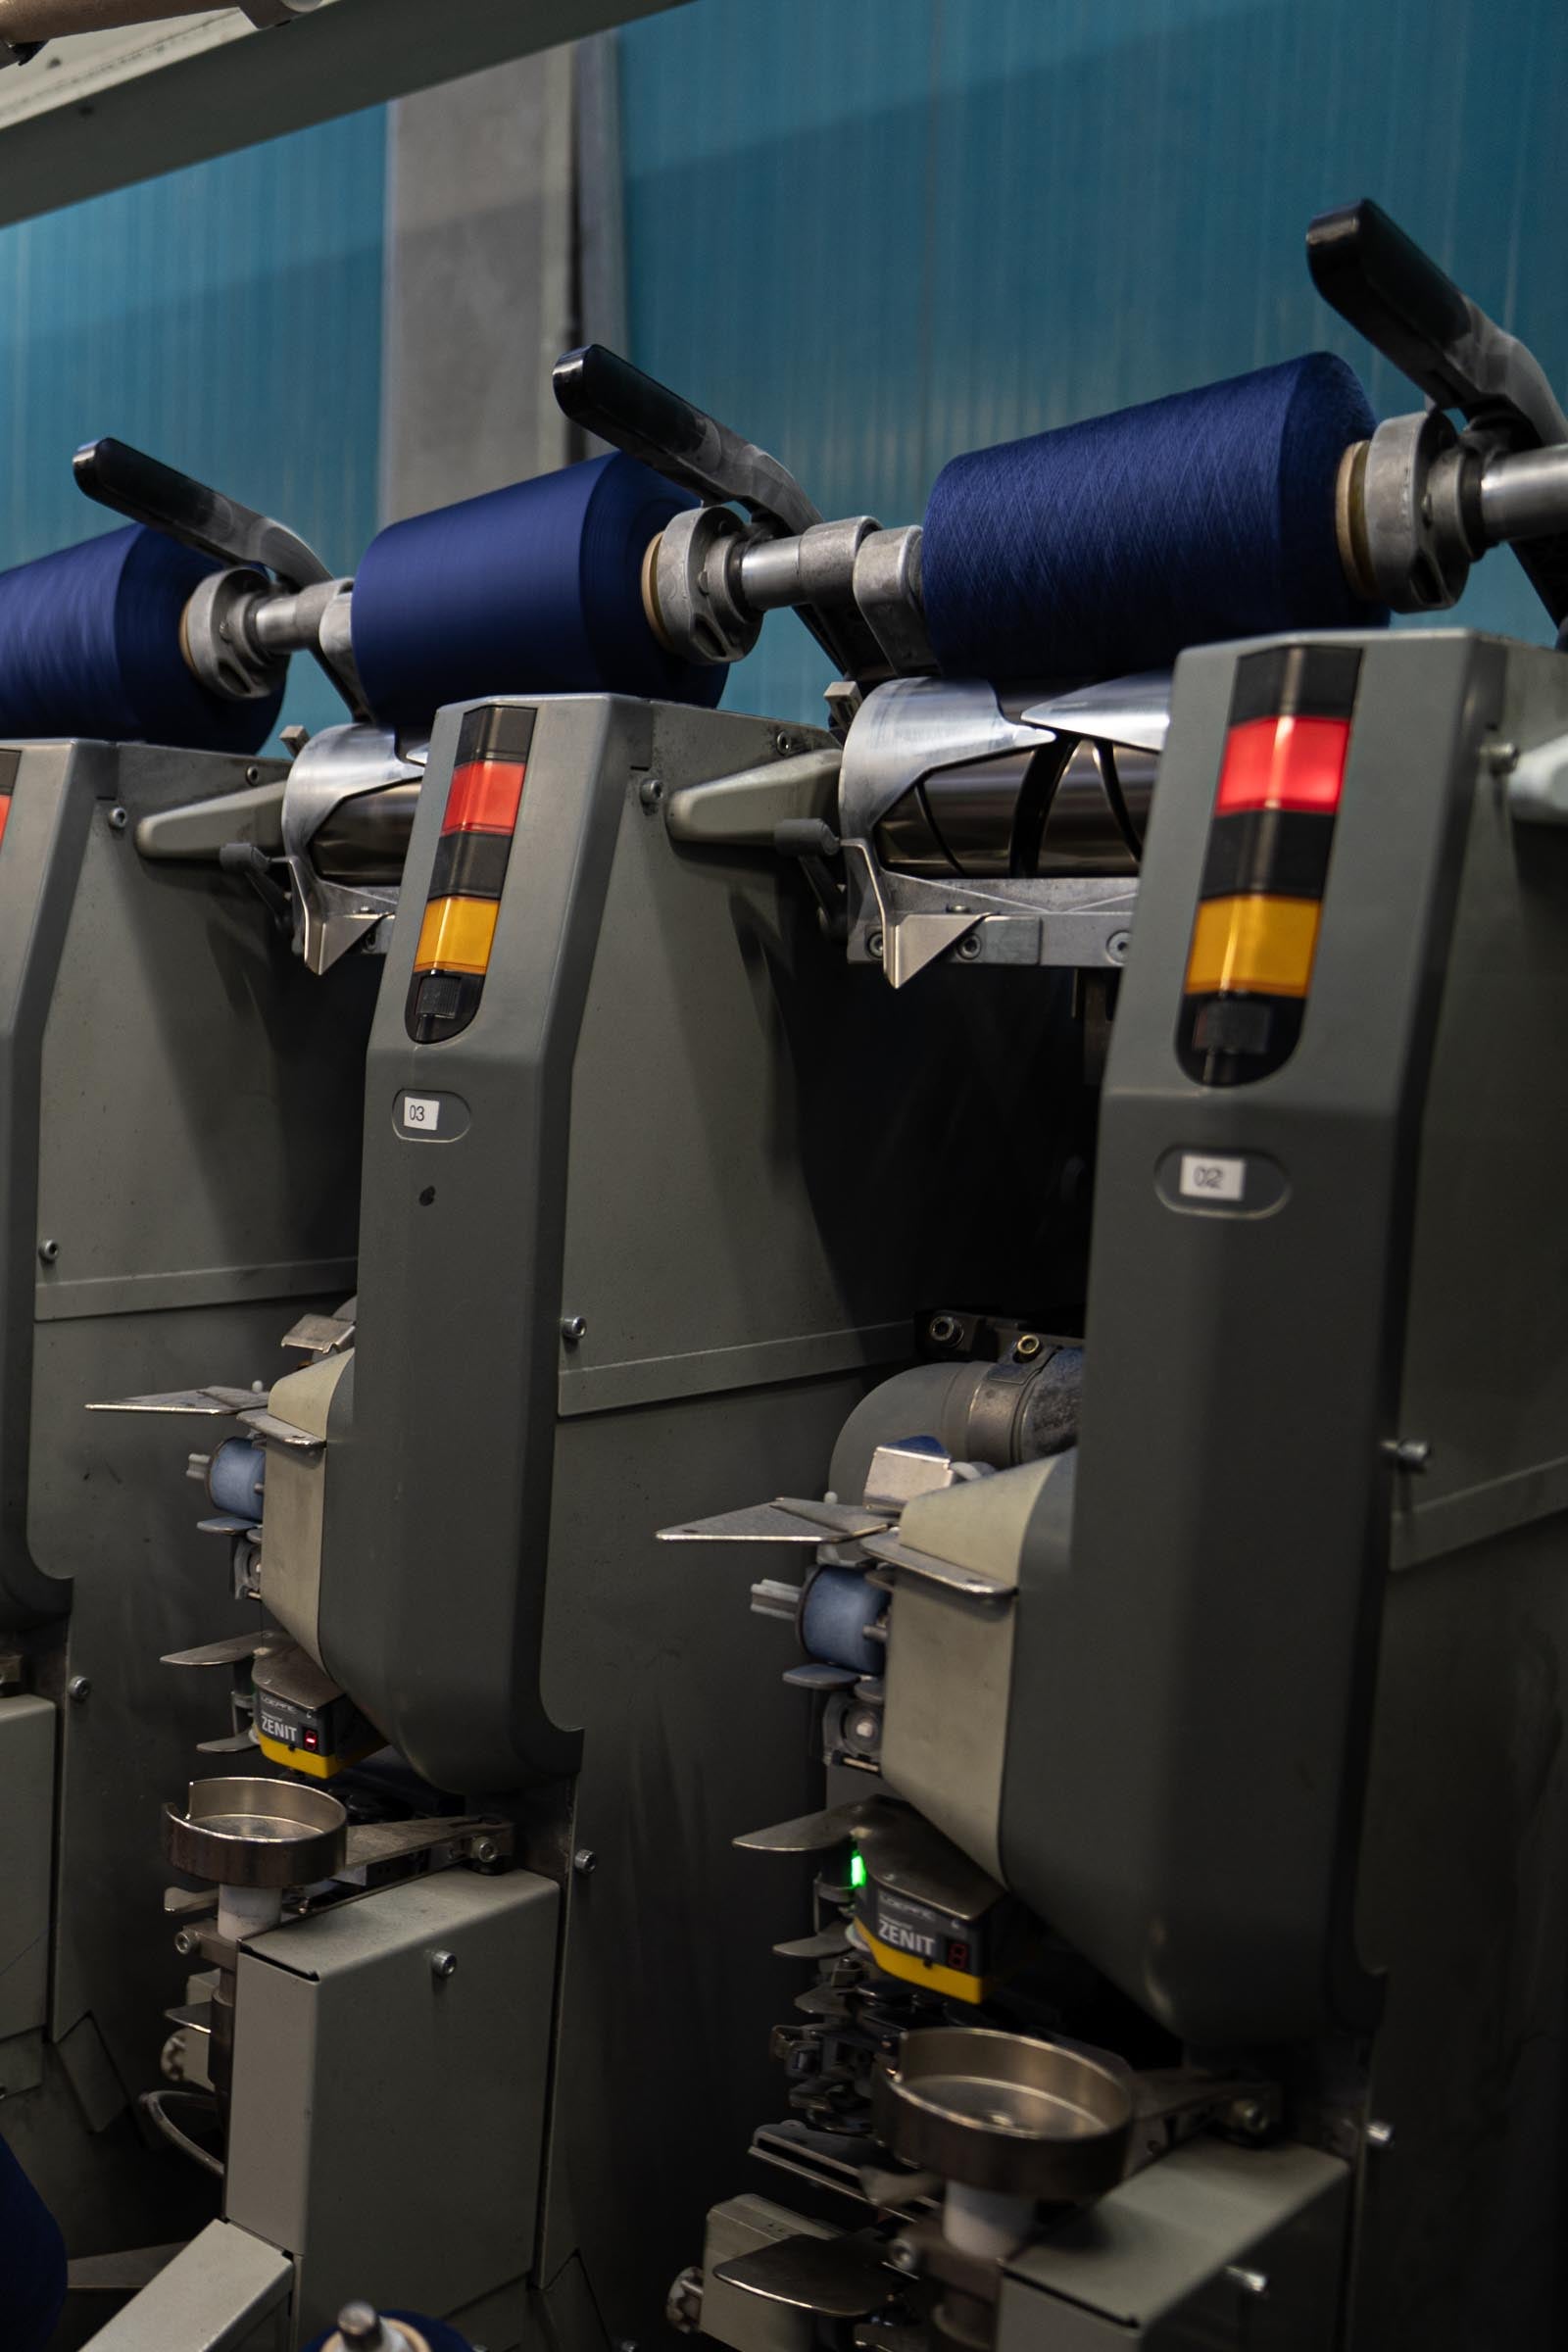 Navy-coloured wool tops being spun on a spinning machine.